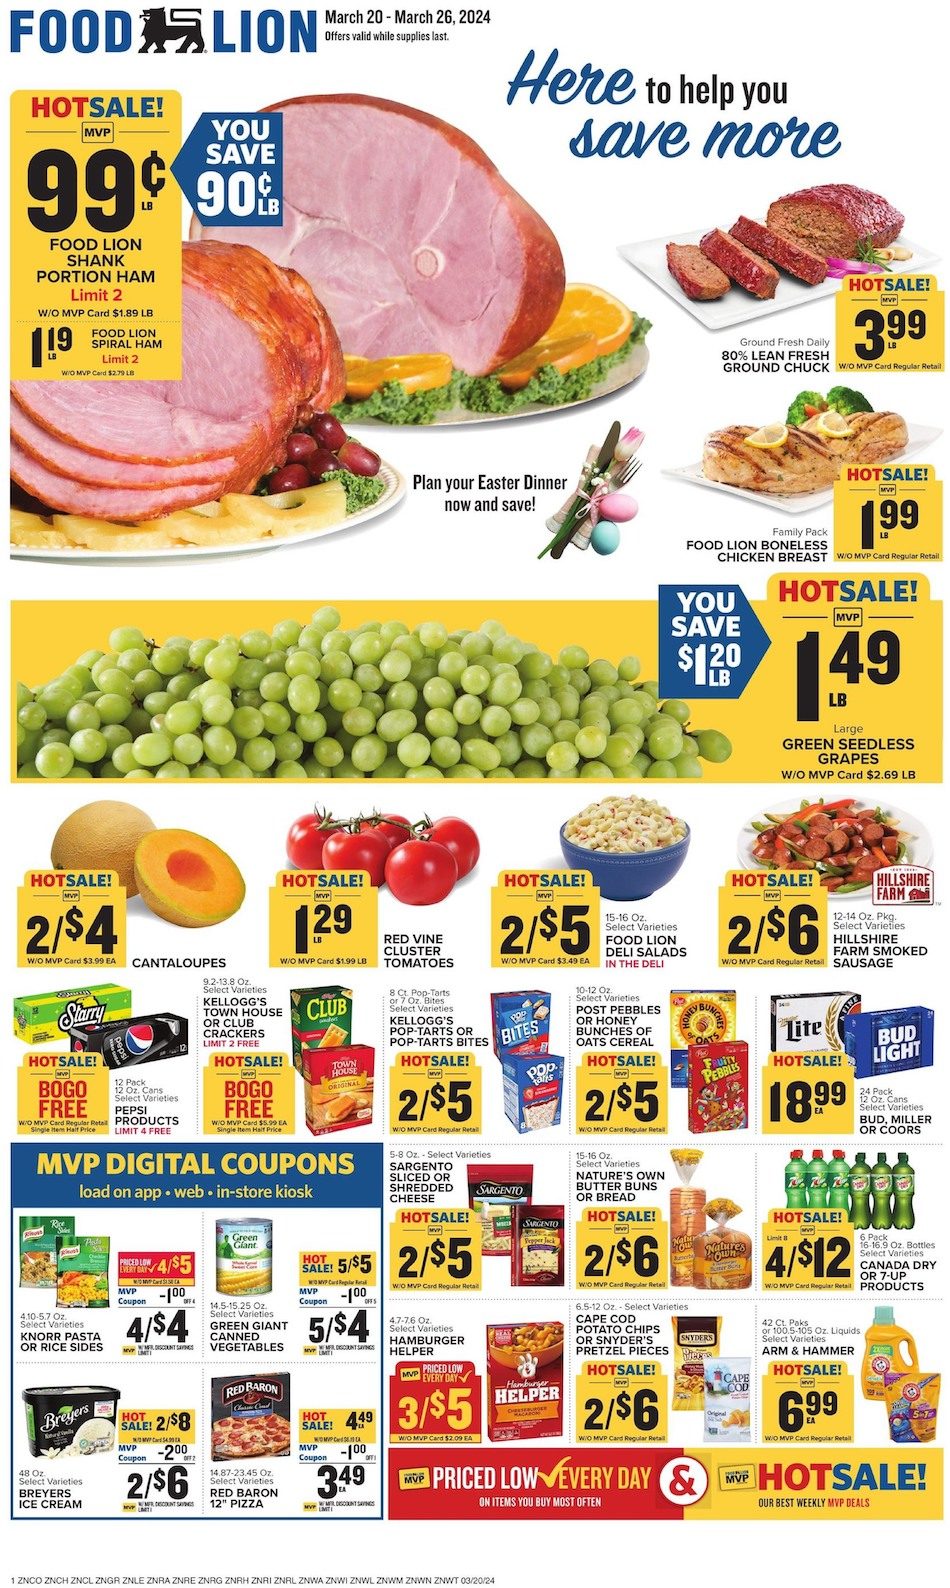 Food Lion Weekly Ad 20th – 26th March 2024 Page 1